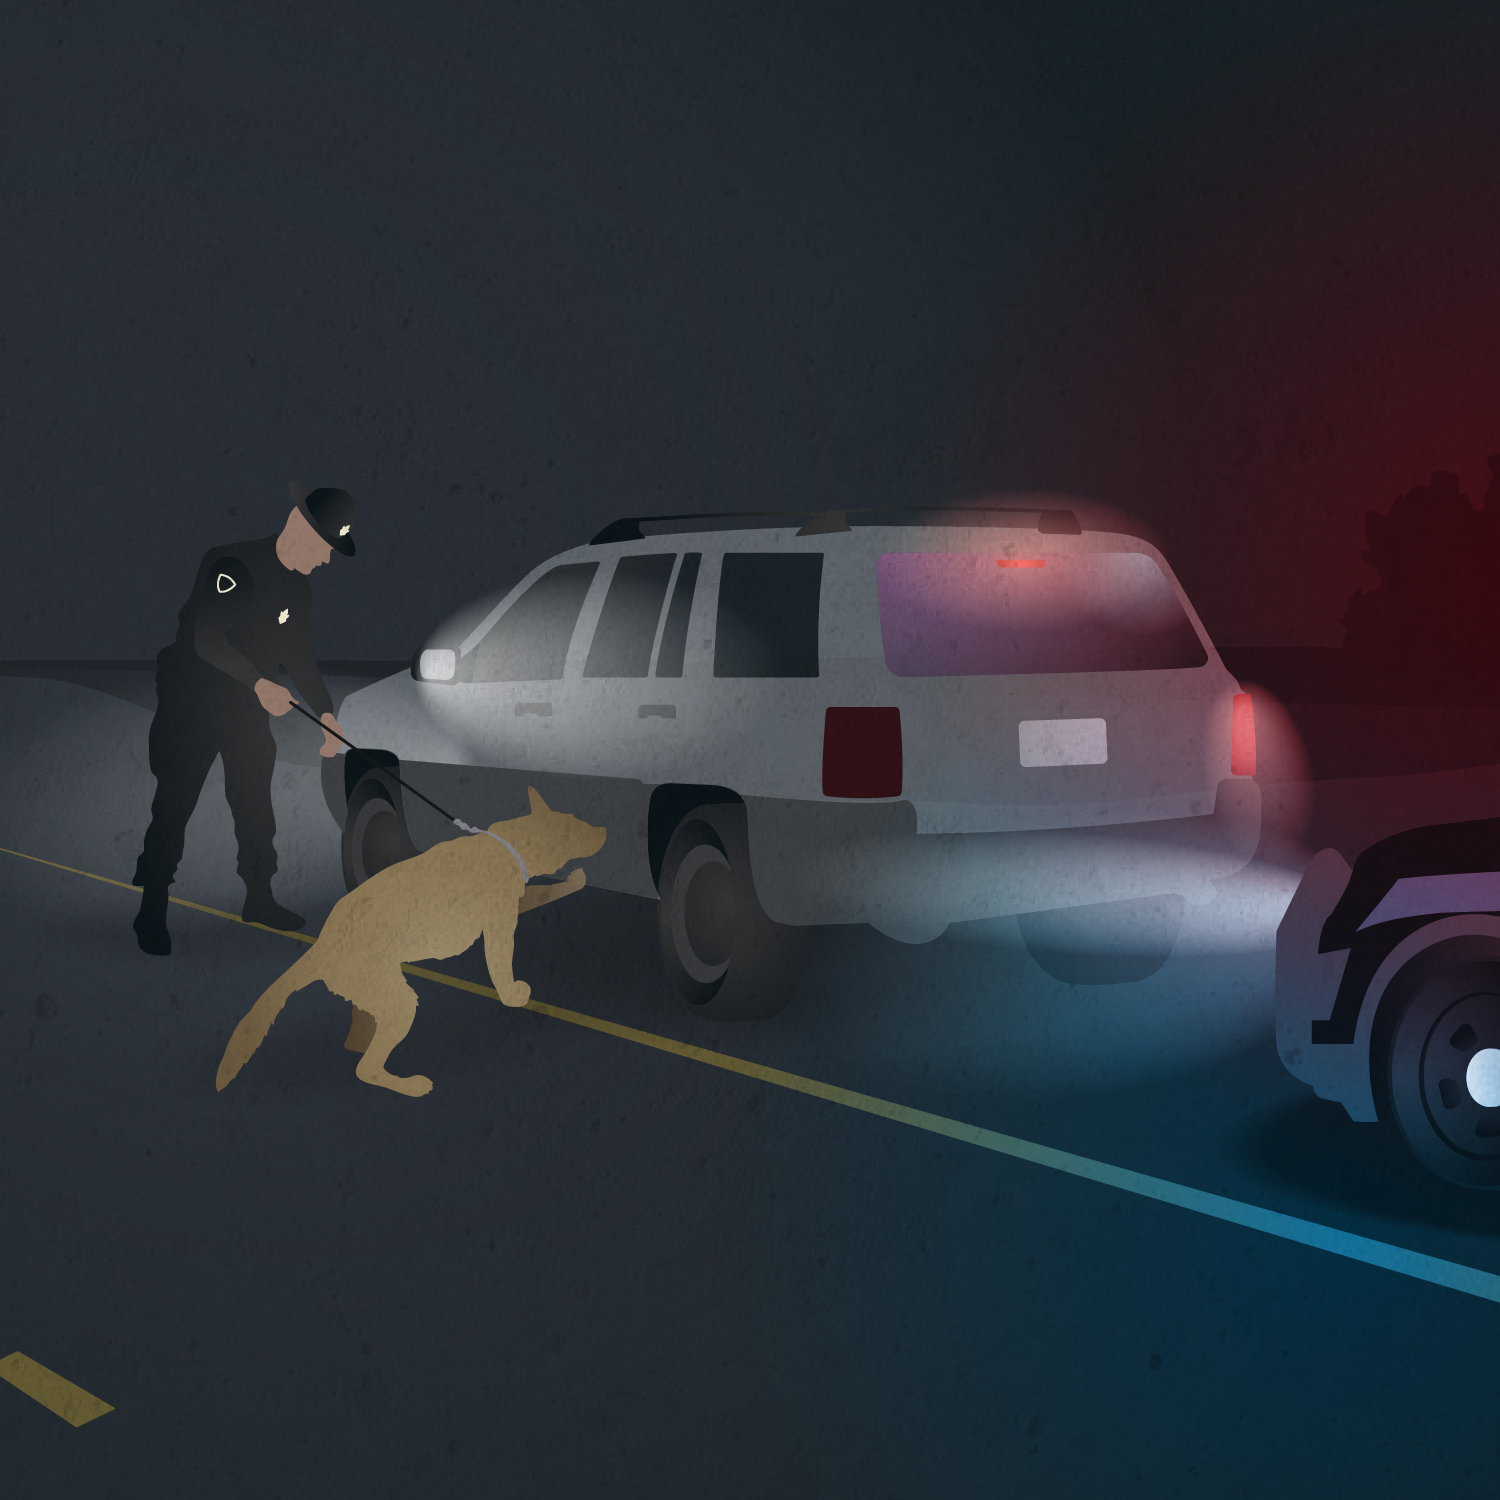 The officer asks for consent to search. If the driver doesn't grant permission to search, the officer calls in a drug-sniffing dog. If the dog signals on drug scents, a search is allowed without the driver's consent and with no warrant obtained. Image by David Kovaluk. 2019.